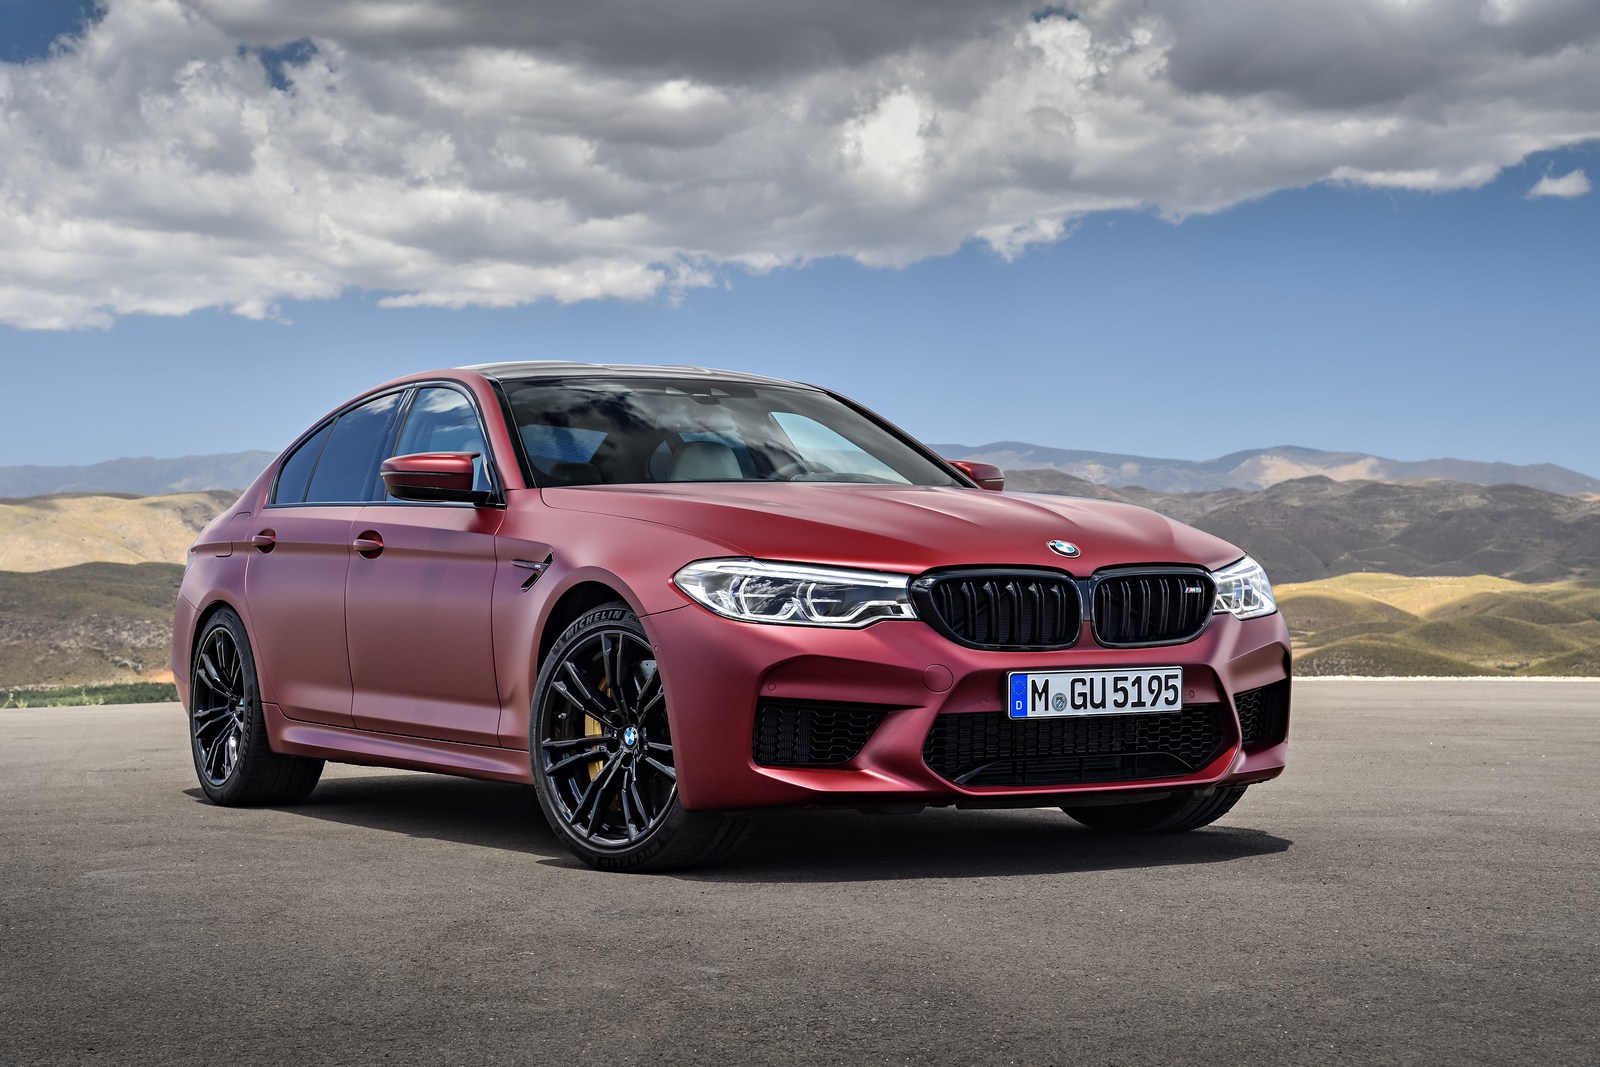 Videos & Gallery: 2018 F90 BMW M5 xDrive Kicks Off – Price and Specs Revealed